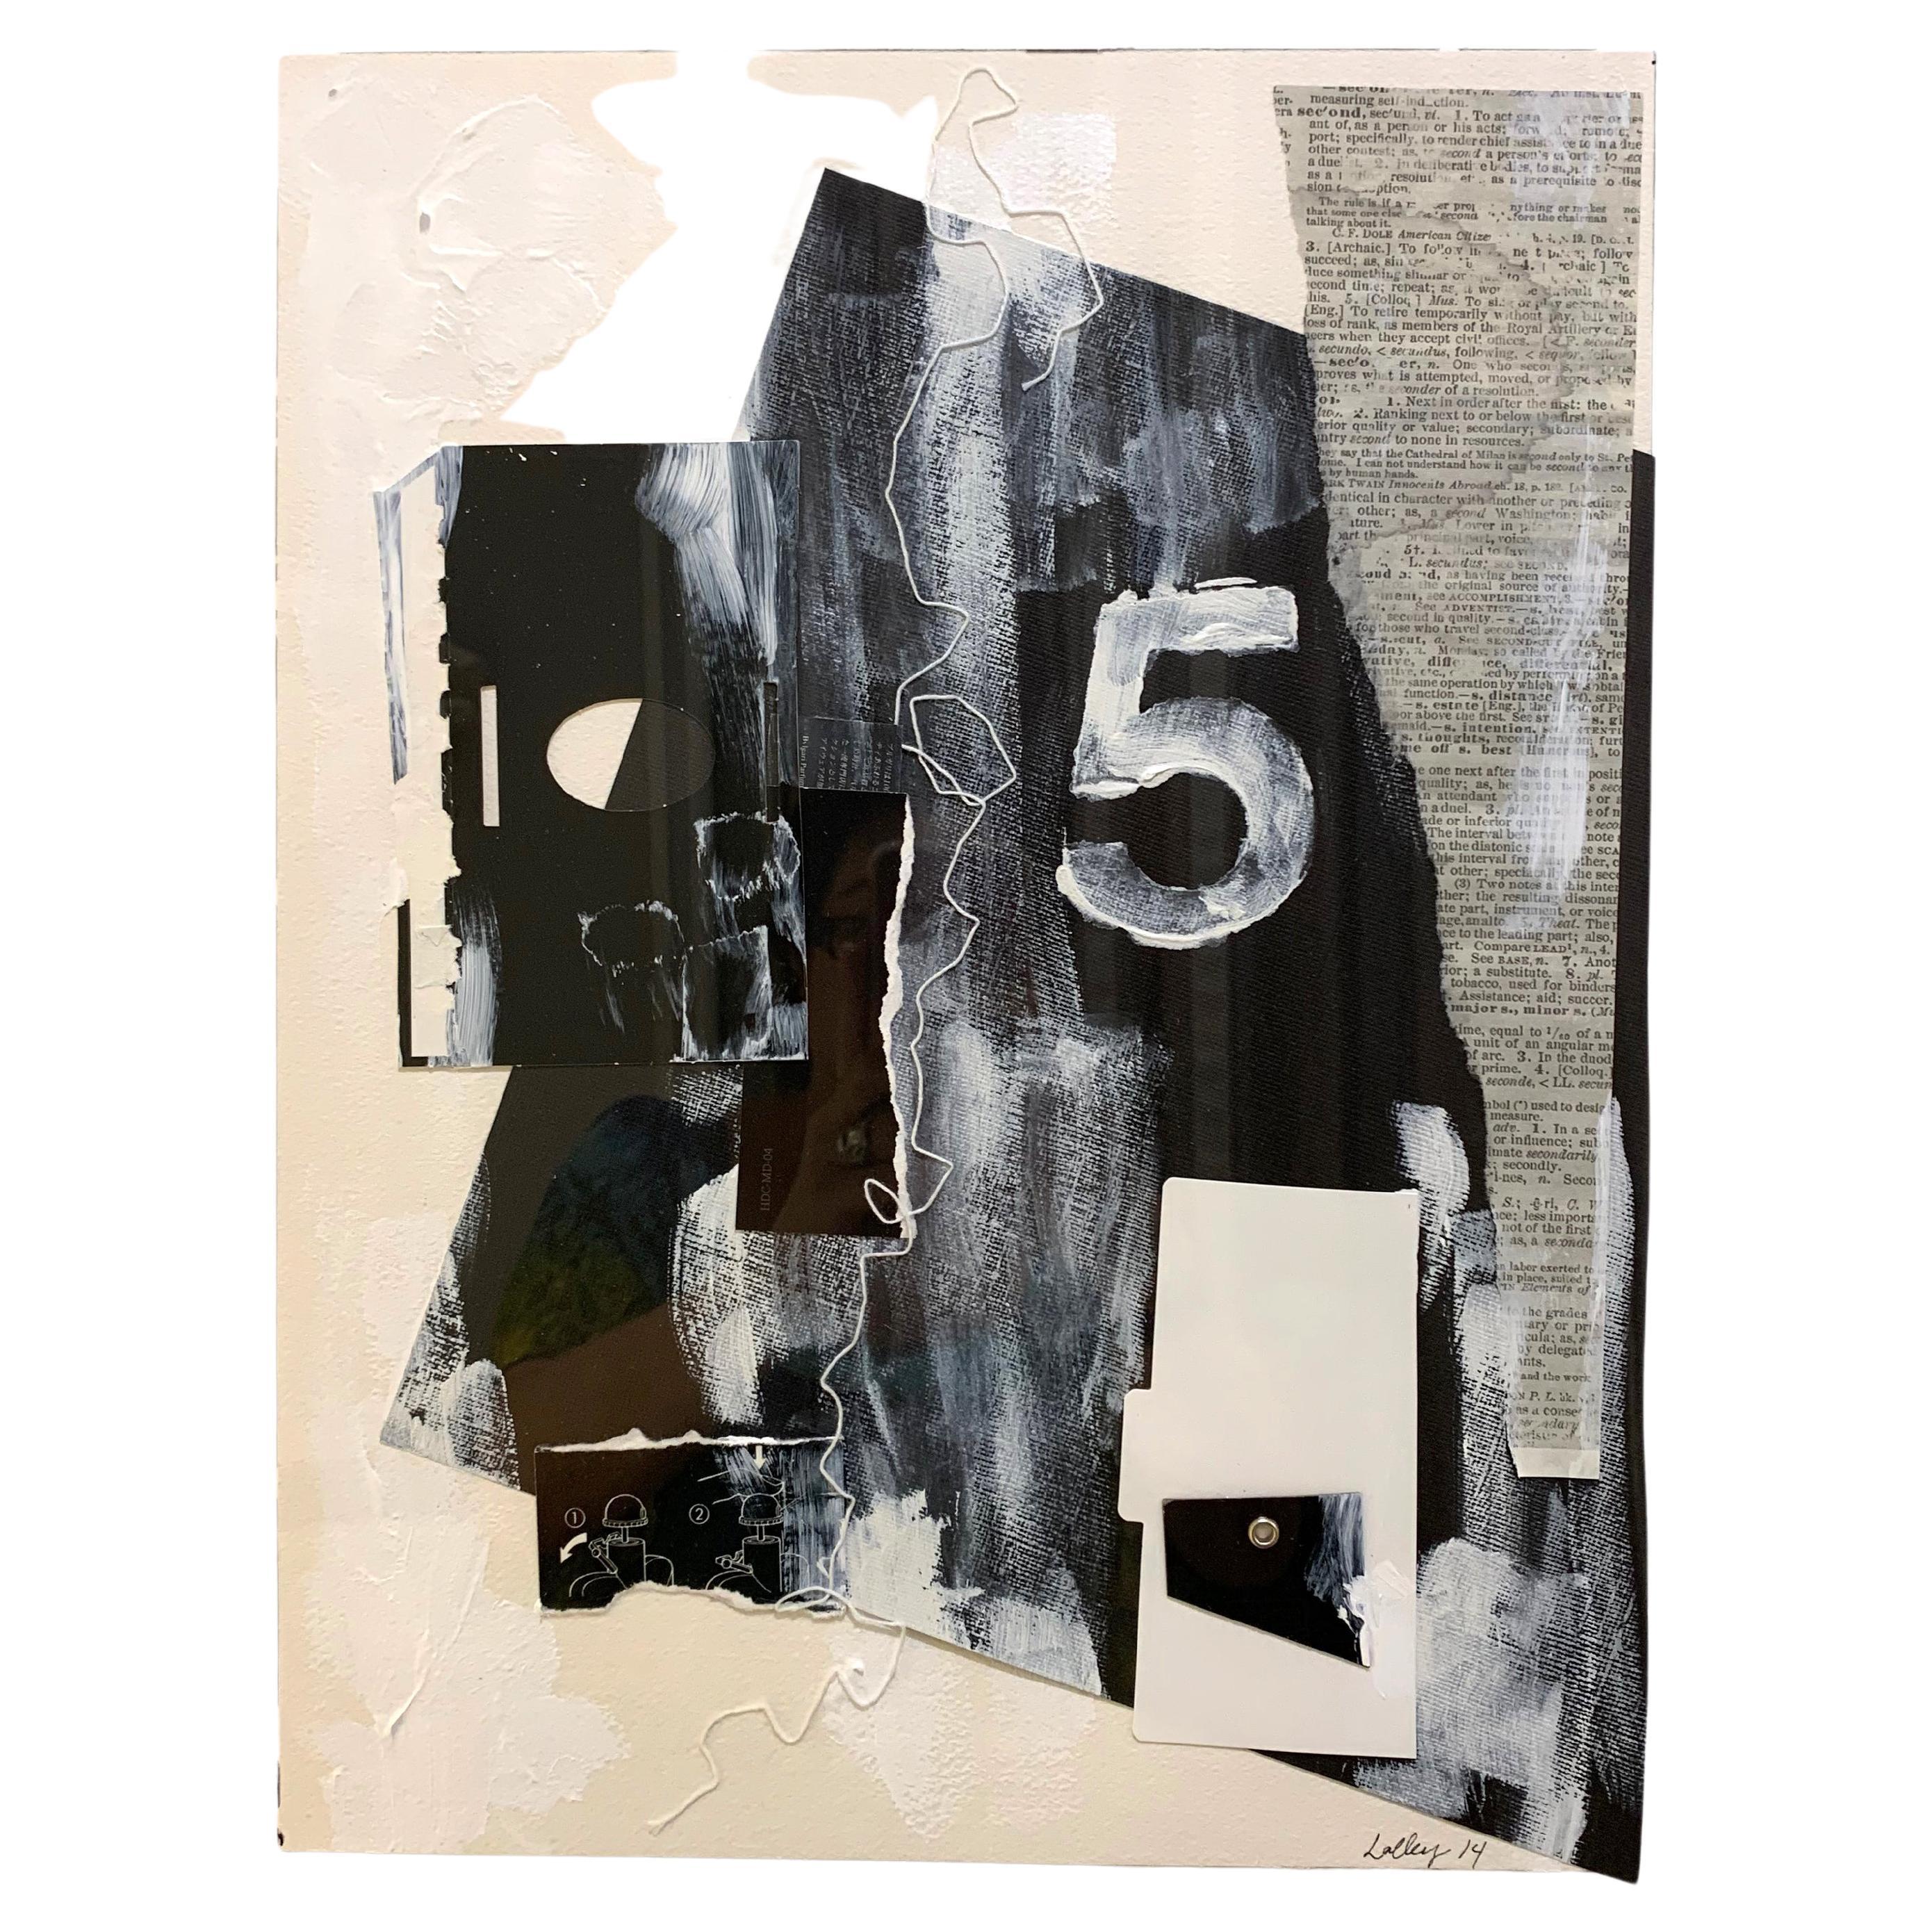 R. Scott Lalley "5" Made in 2014 Acrylic Paint, Ink and Paper Collage For Sale